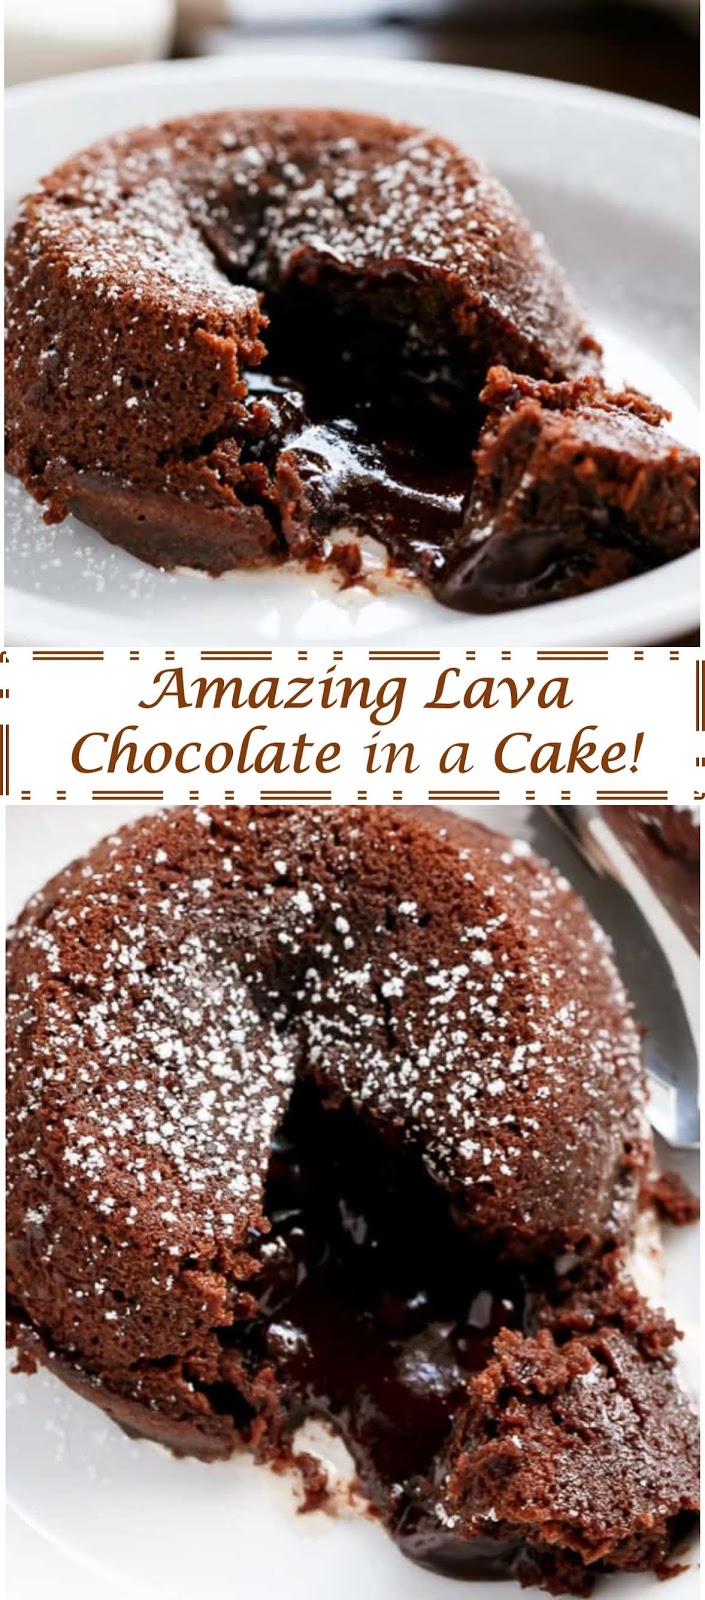 243 Reviews: My BEST #Recipes >> Amazing Lava #Chocolate in a #Cake - ~~~.